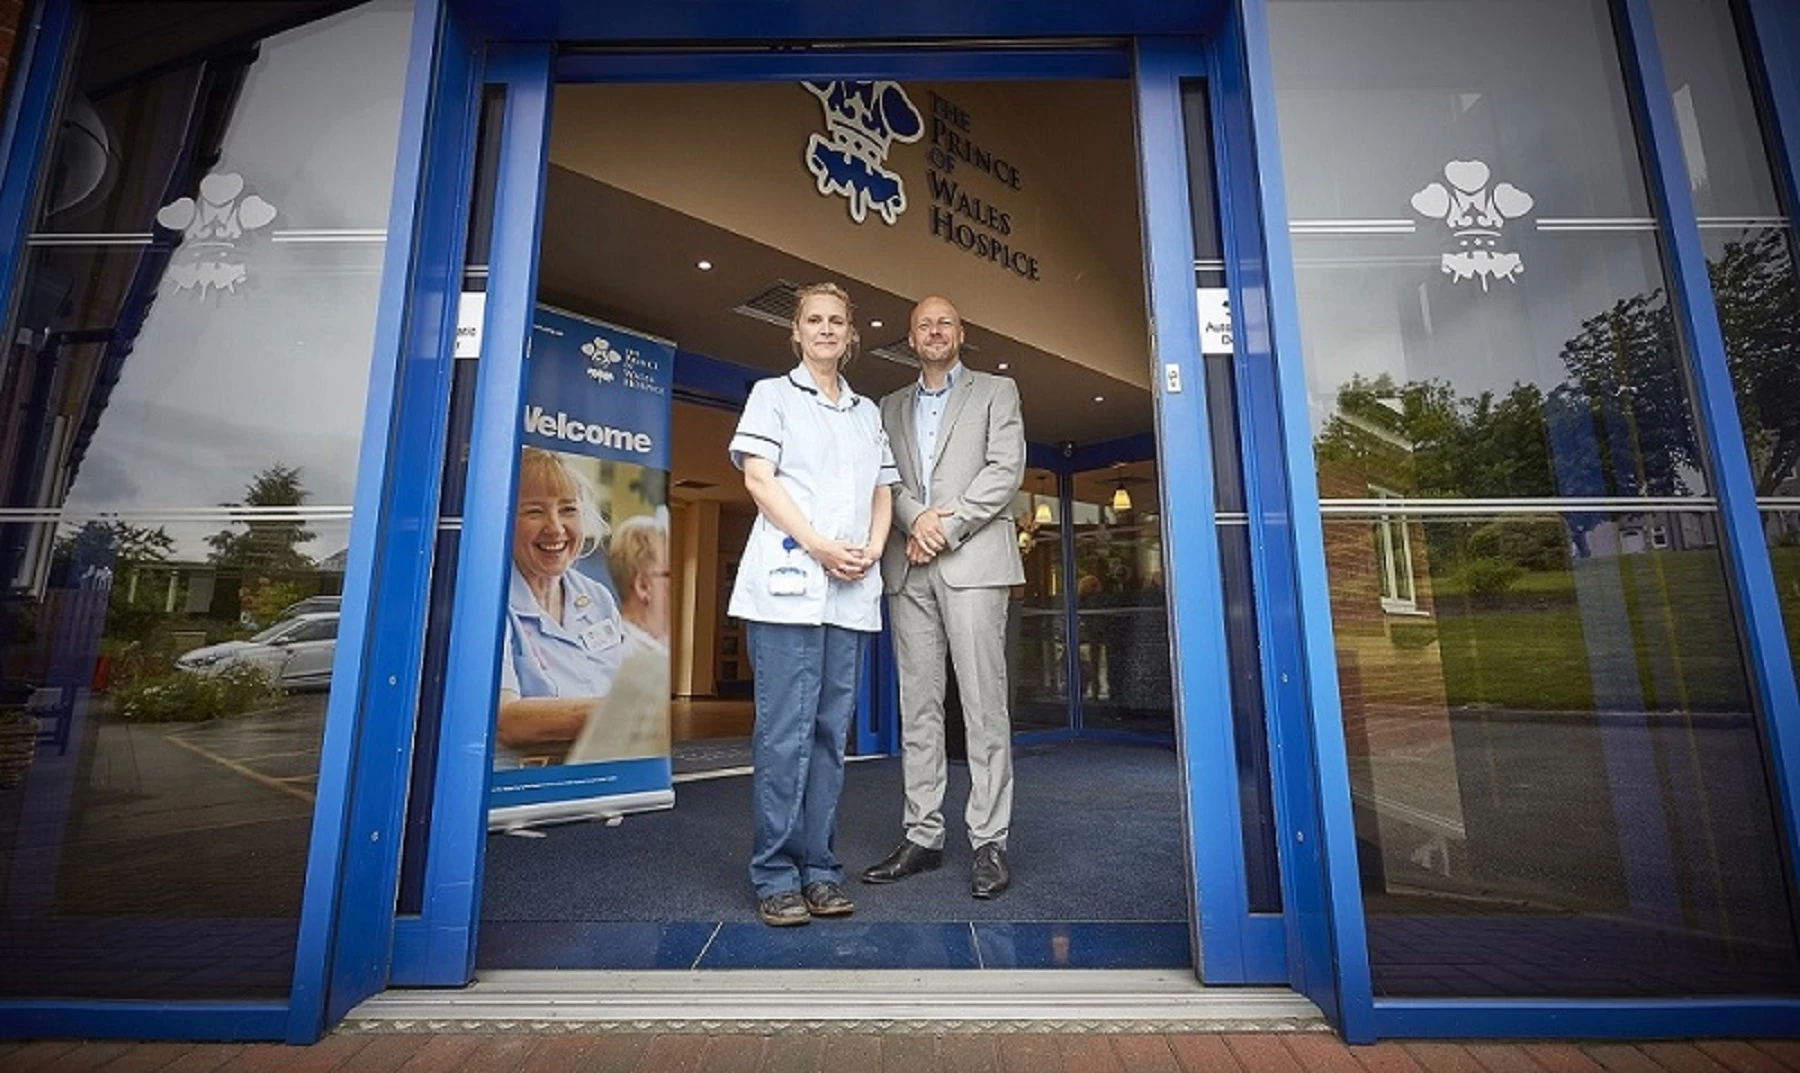 Leeds firm calls on local businesses to support Prince of Wales Hospice